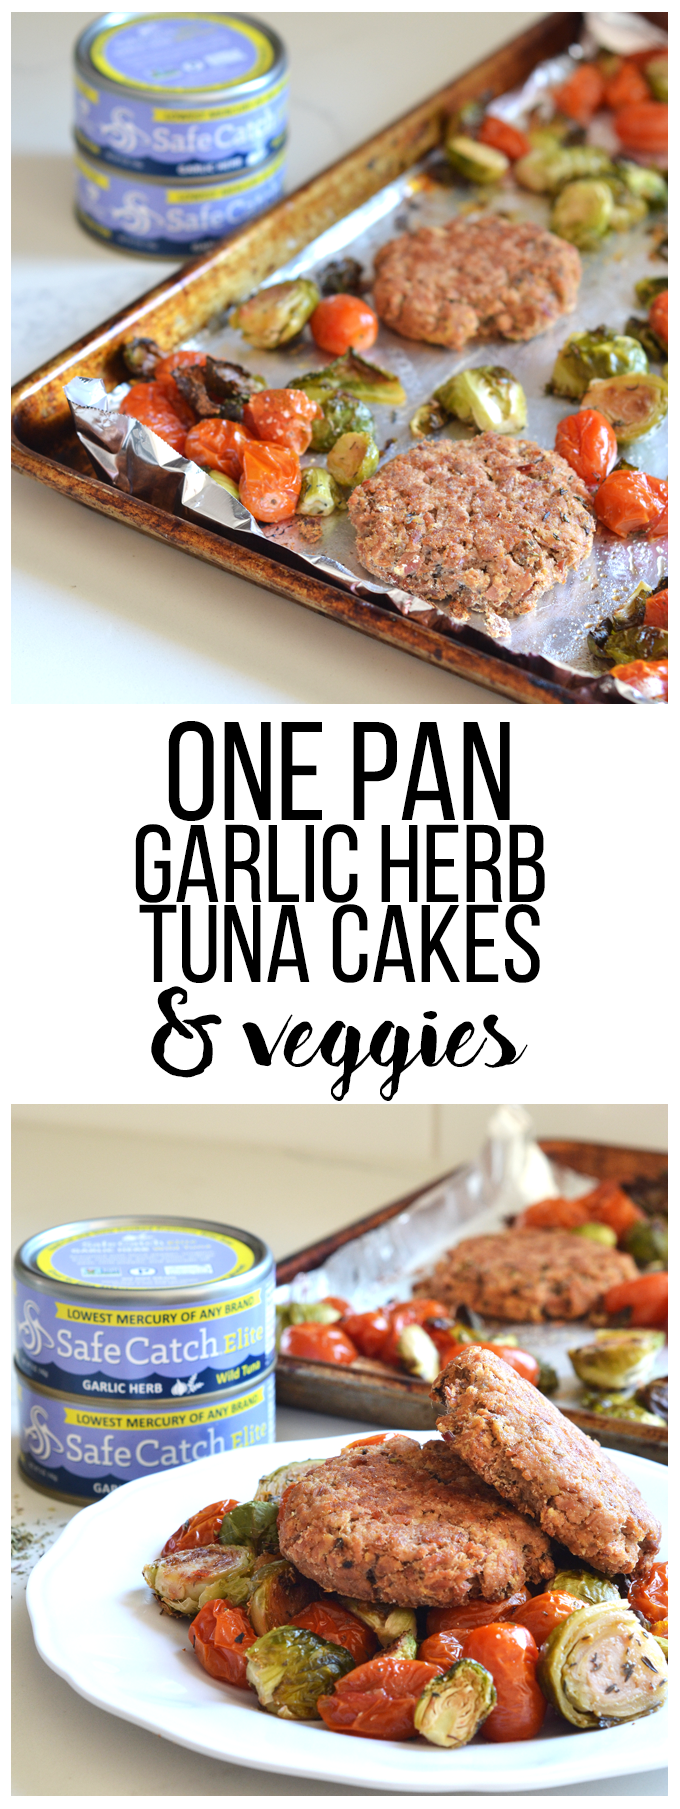 This One Pan Garlic Herb Tuna Cakes and Veggies recipe is a simple way to get a protein and nutrient packed meal in! Whole30 & Paleo with lots of flavor!